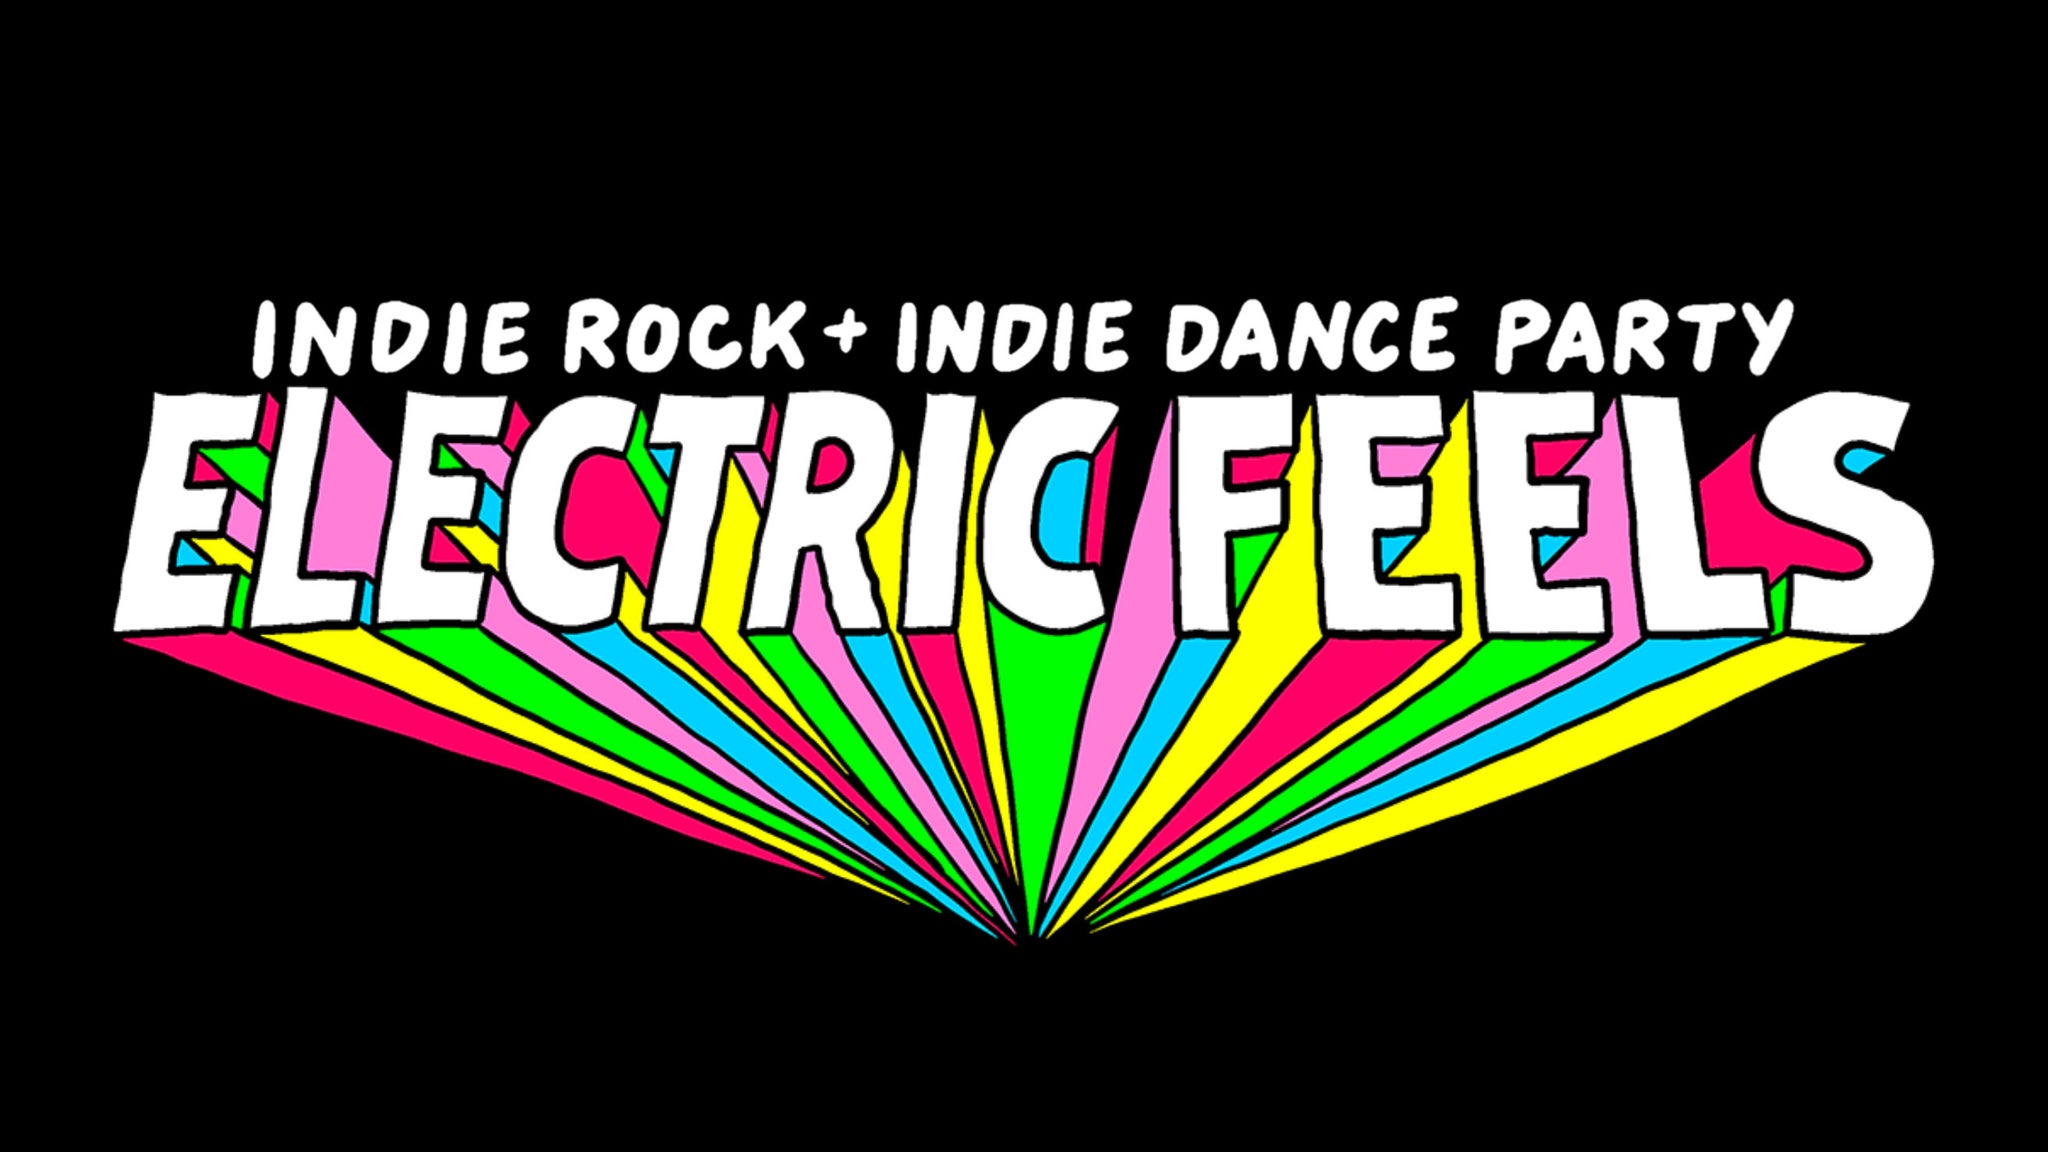 Electric Feels: Indie Rock + Indie Dance Party - 18+ Event